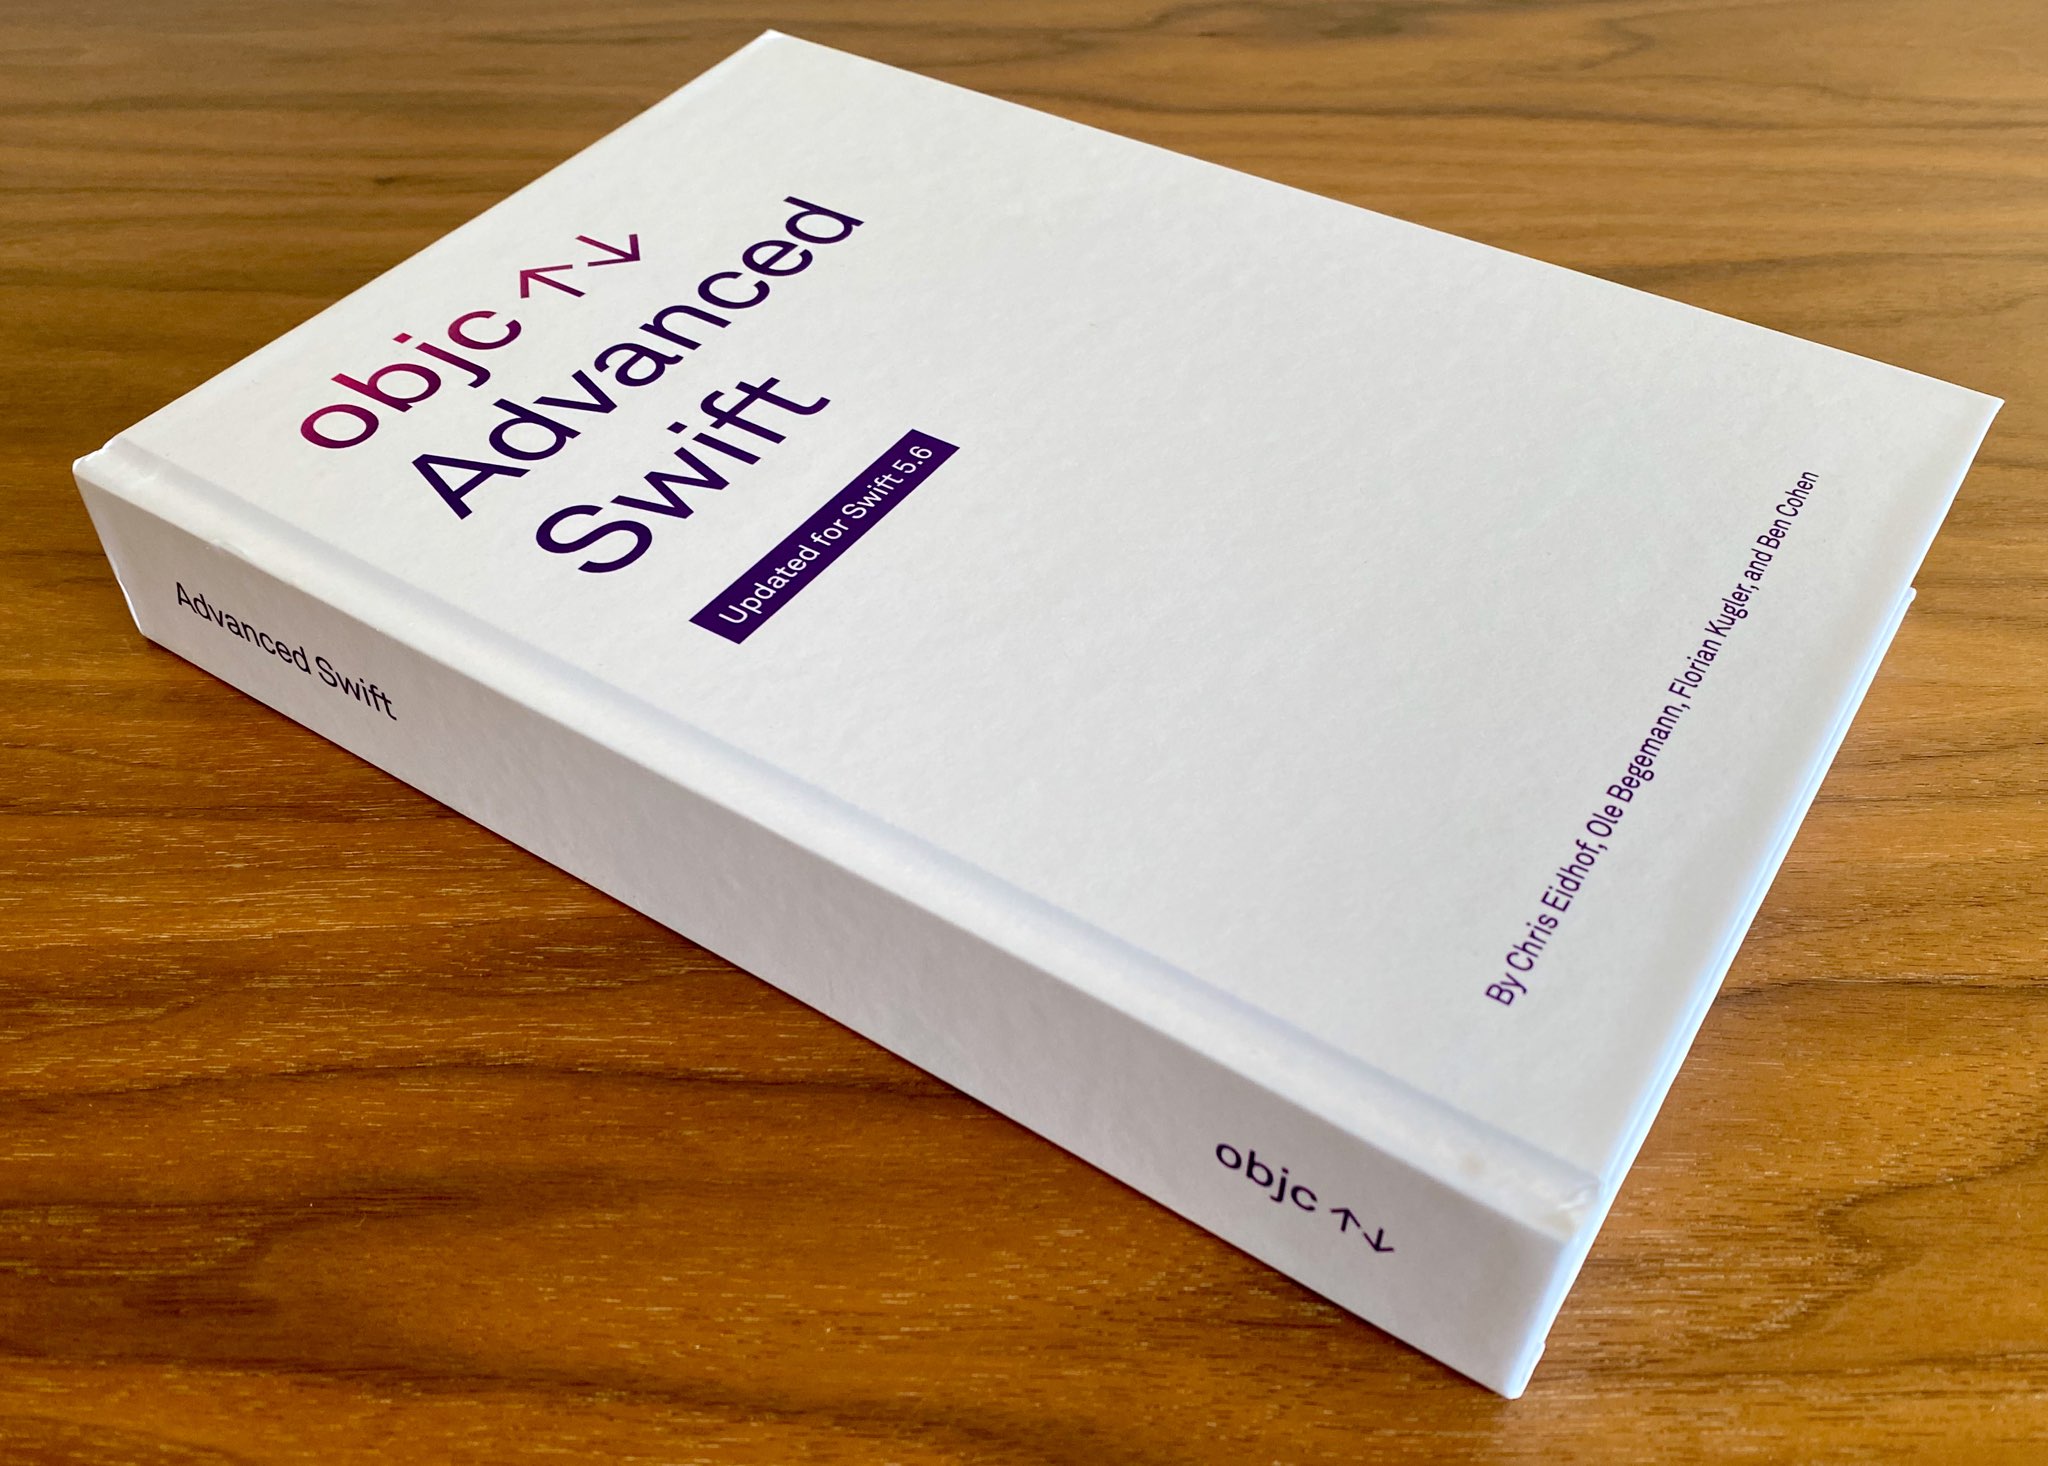 Photo of the Advanced Swift hardcover